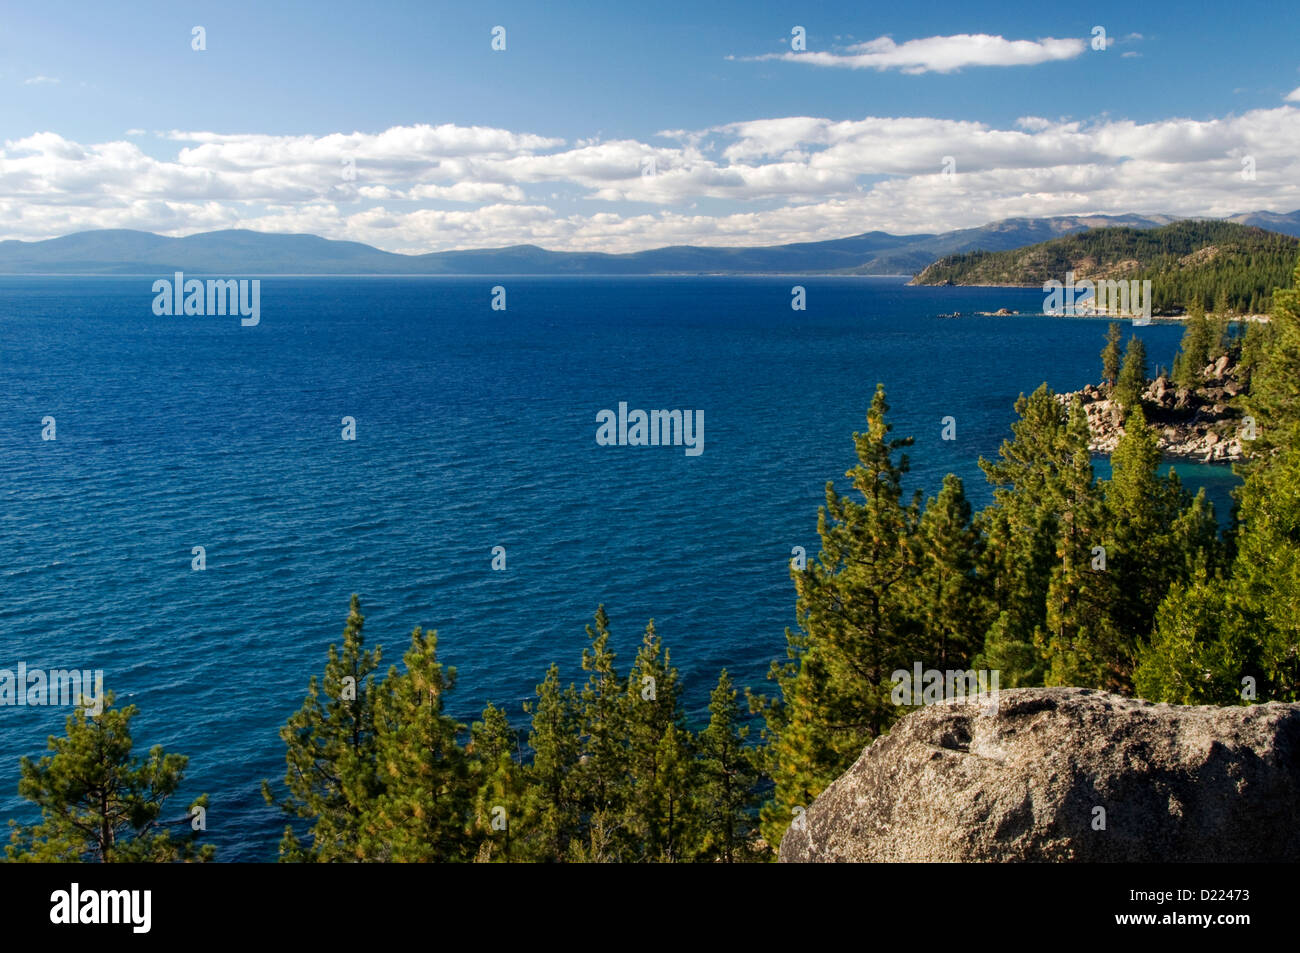 A beautiful summer view of Lake Tahoe from the popular Logan Shoals Vista Point on the east shore of the lake, Nevada. Stock Photo